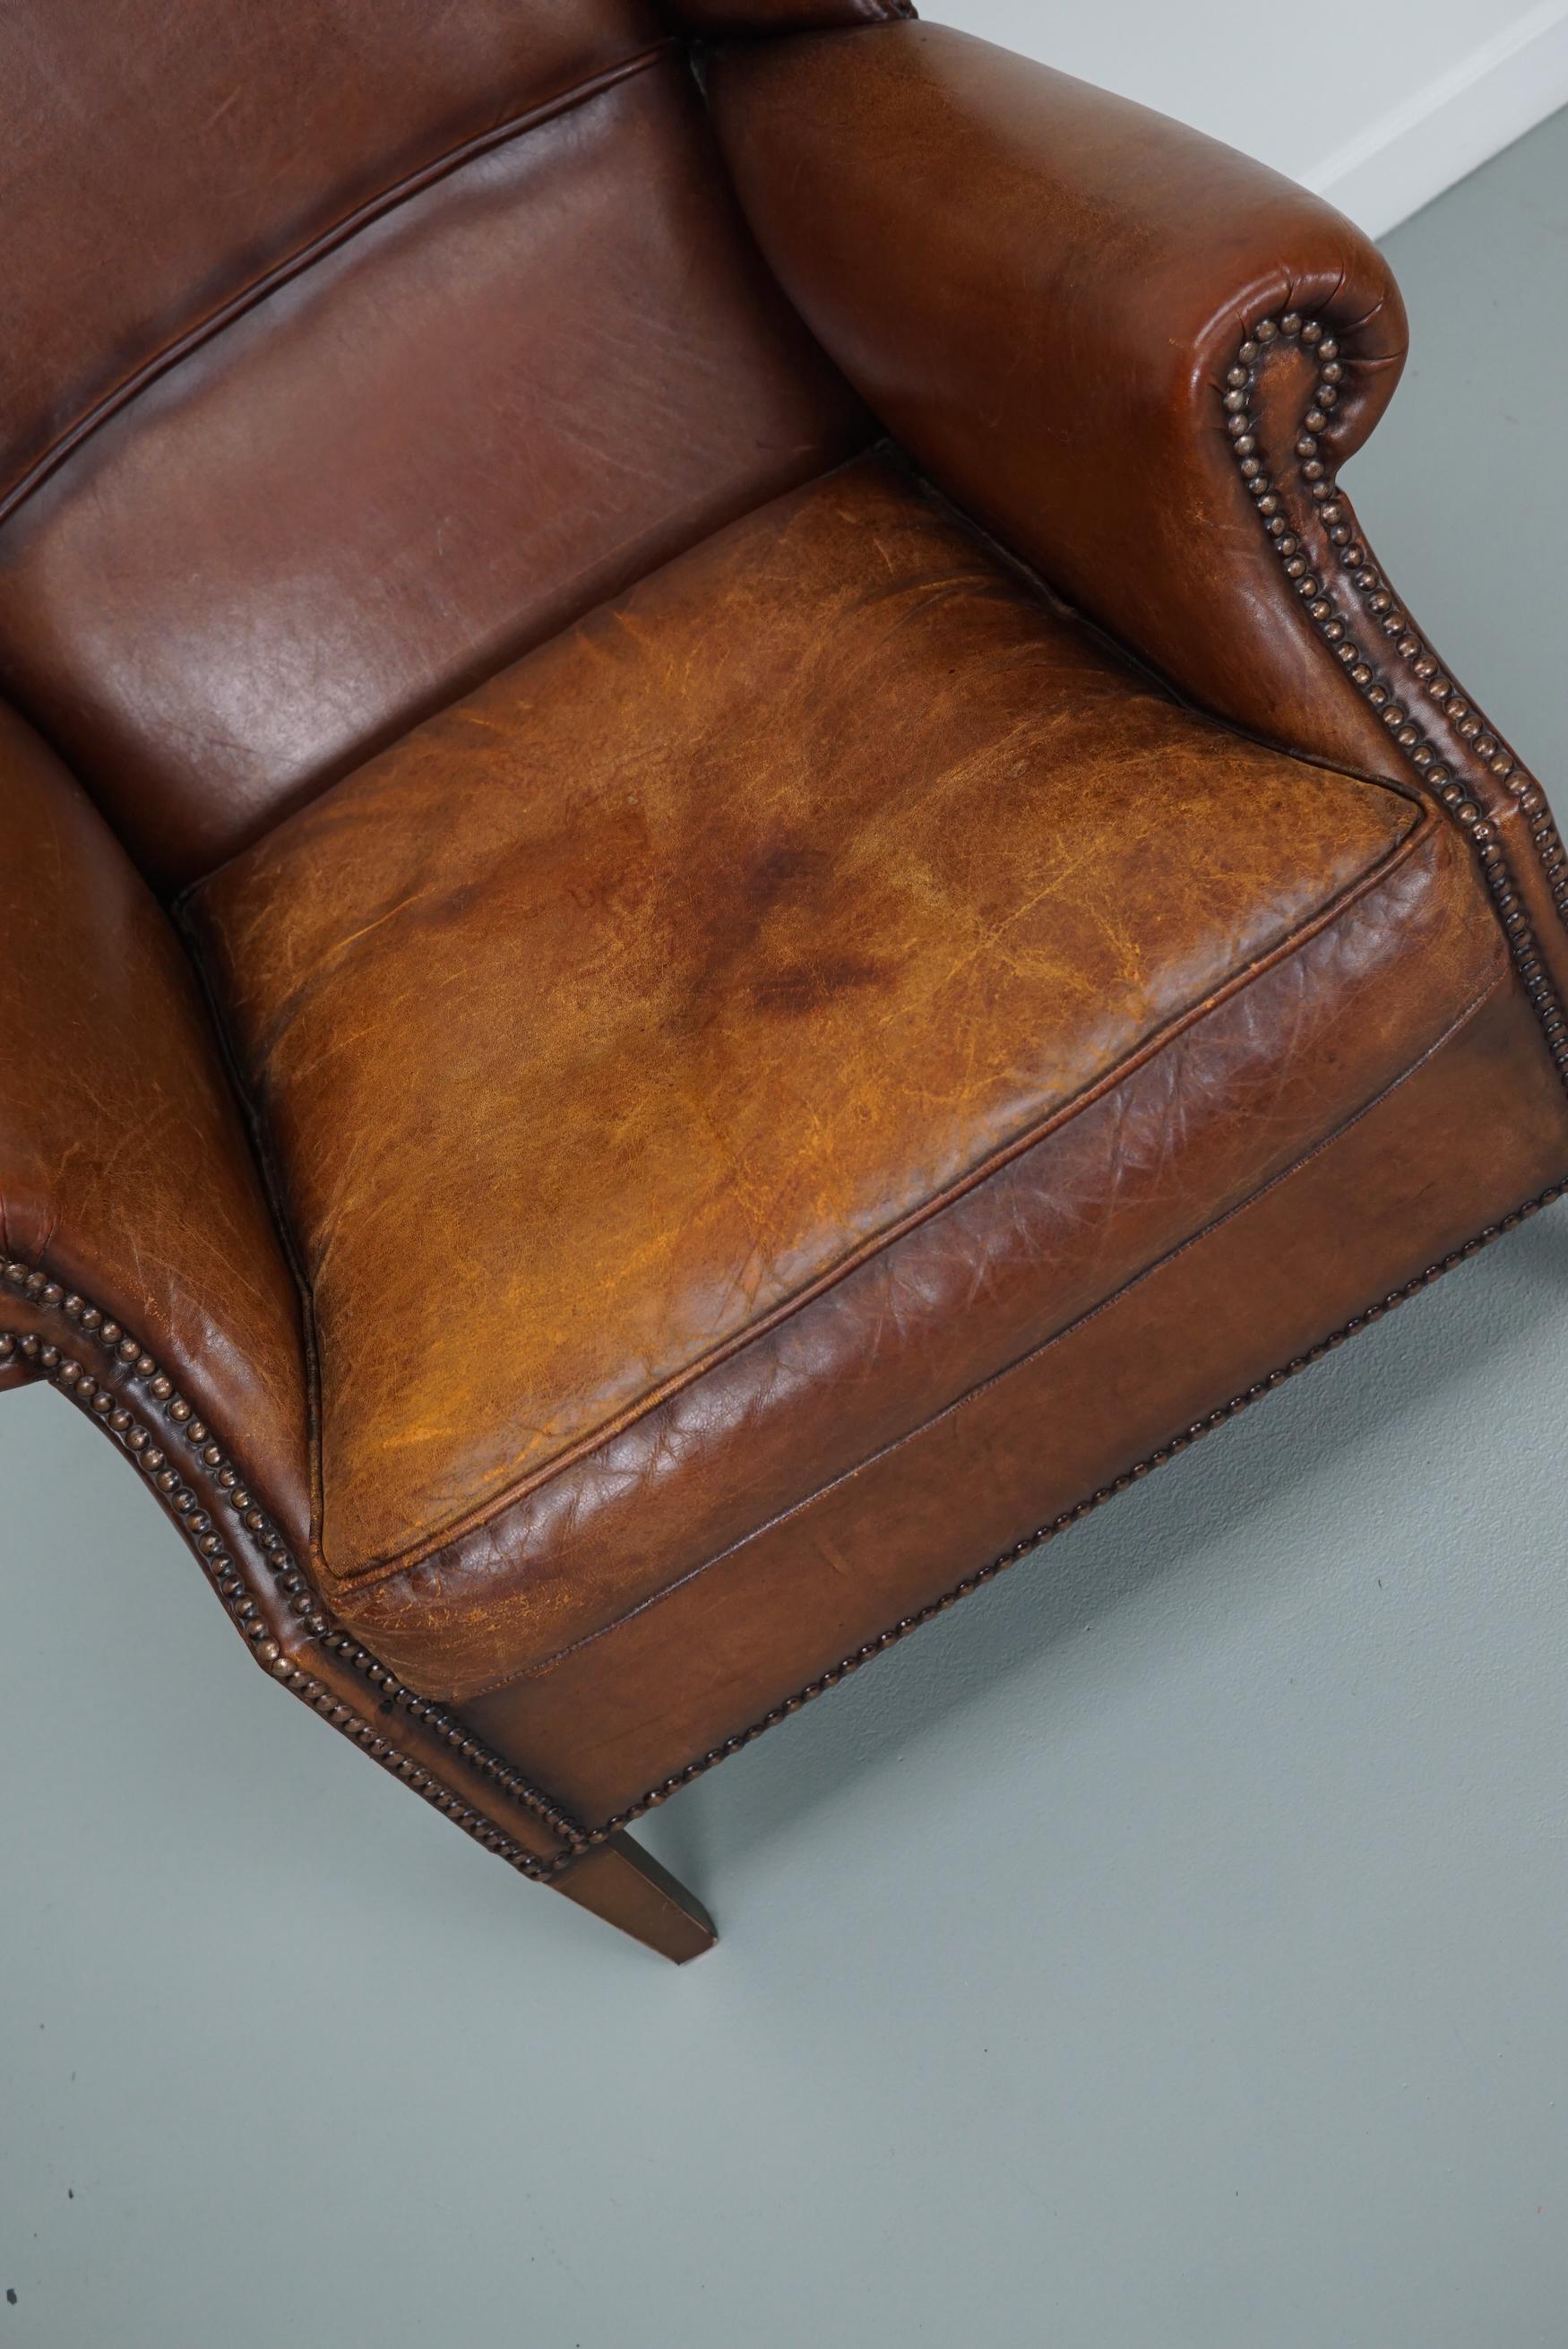 Late 20th Century Vintage Dutch Cognac Colored Leather Club Chair For Sale